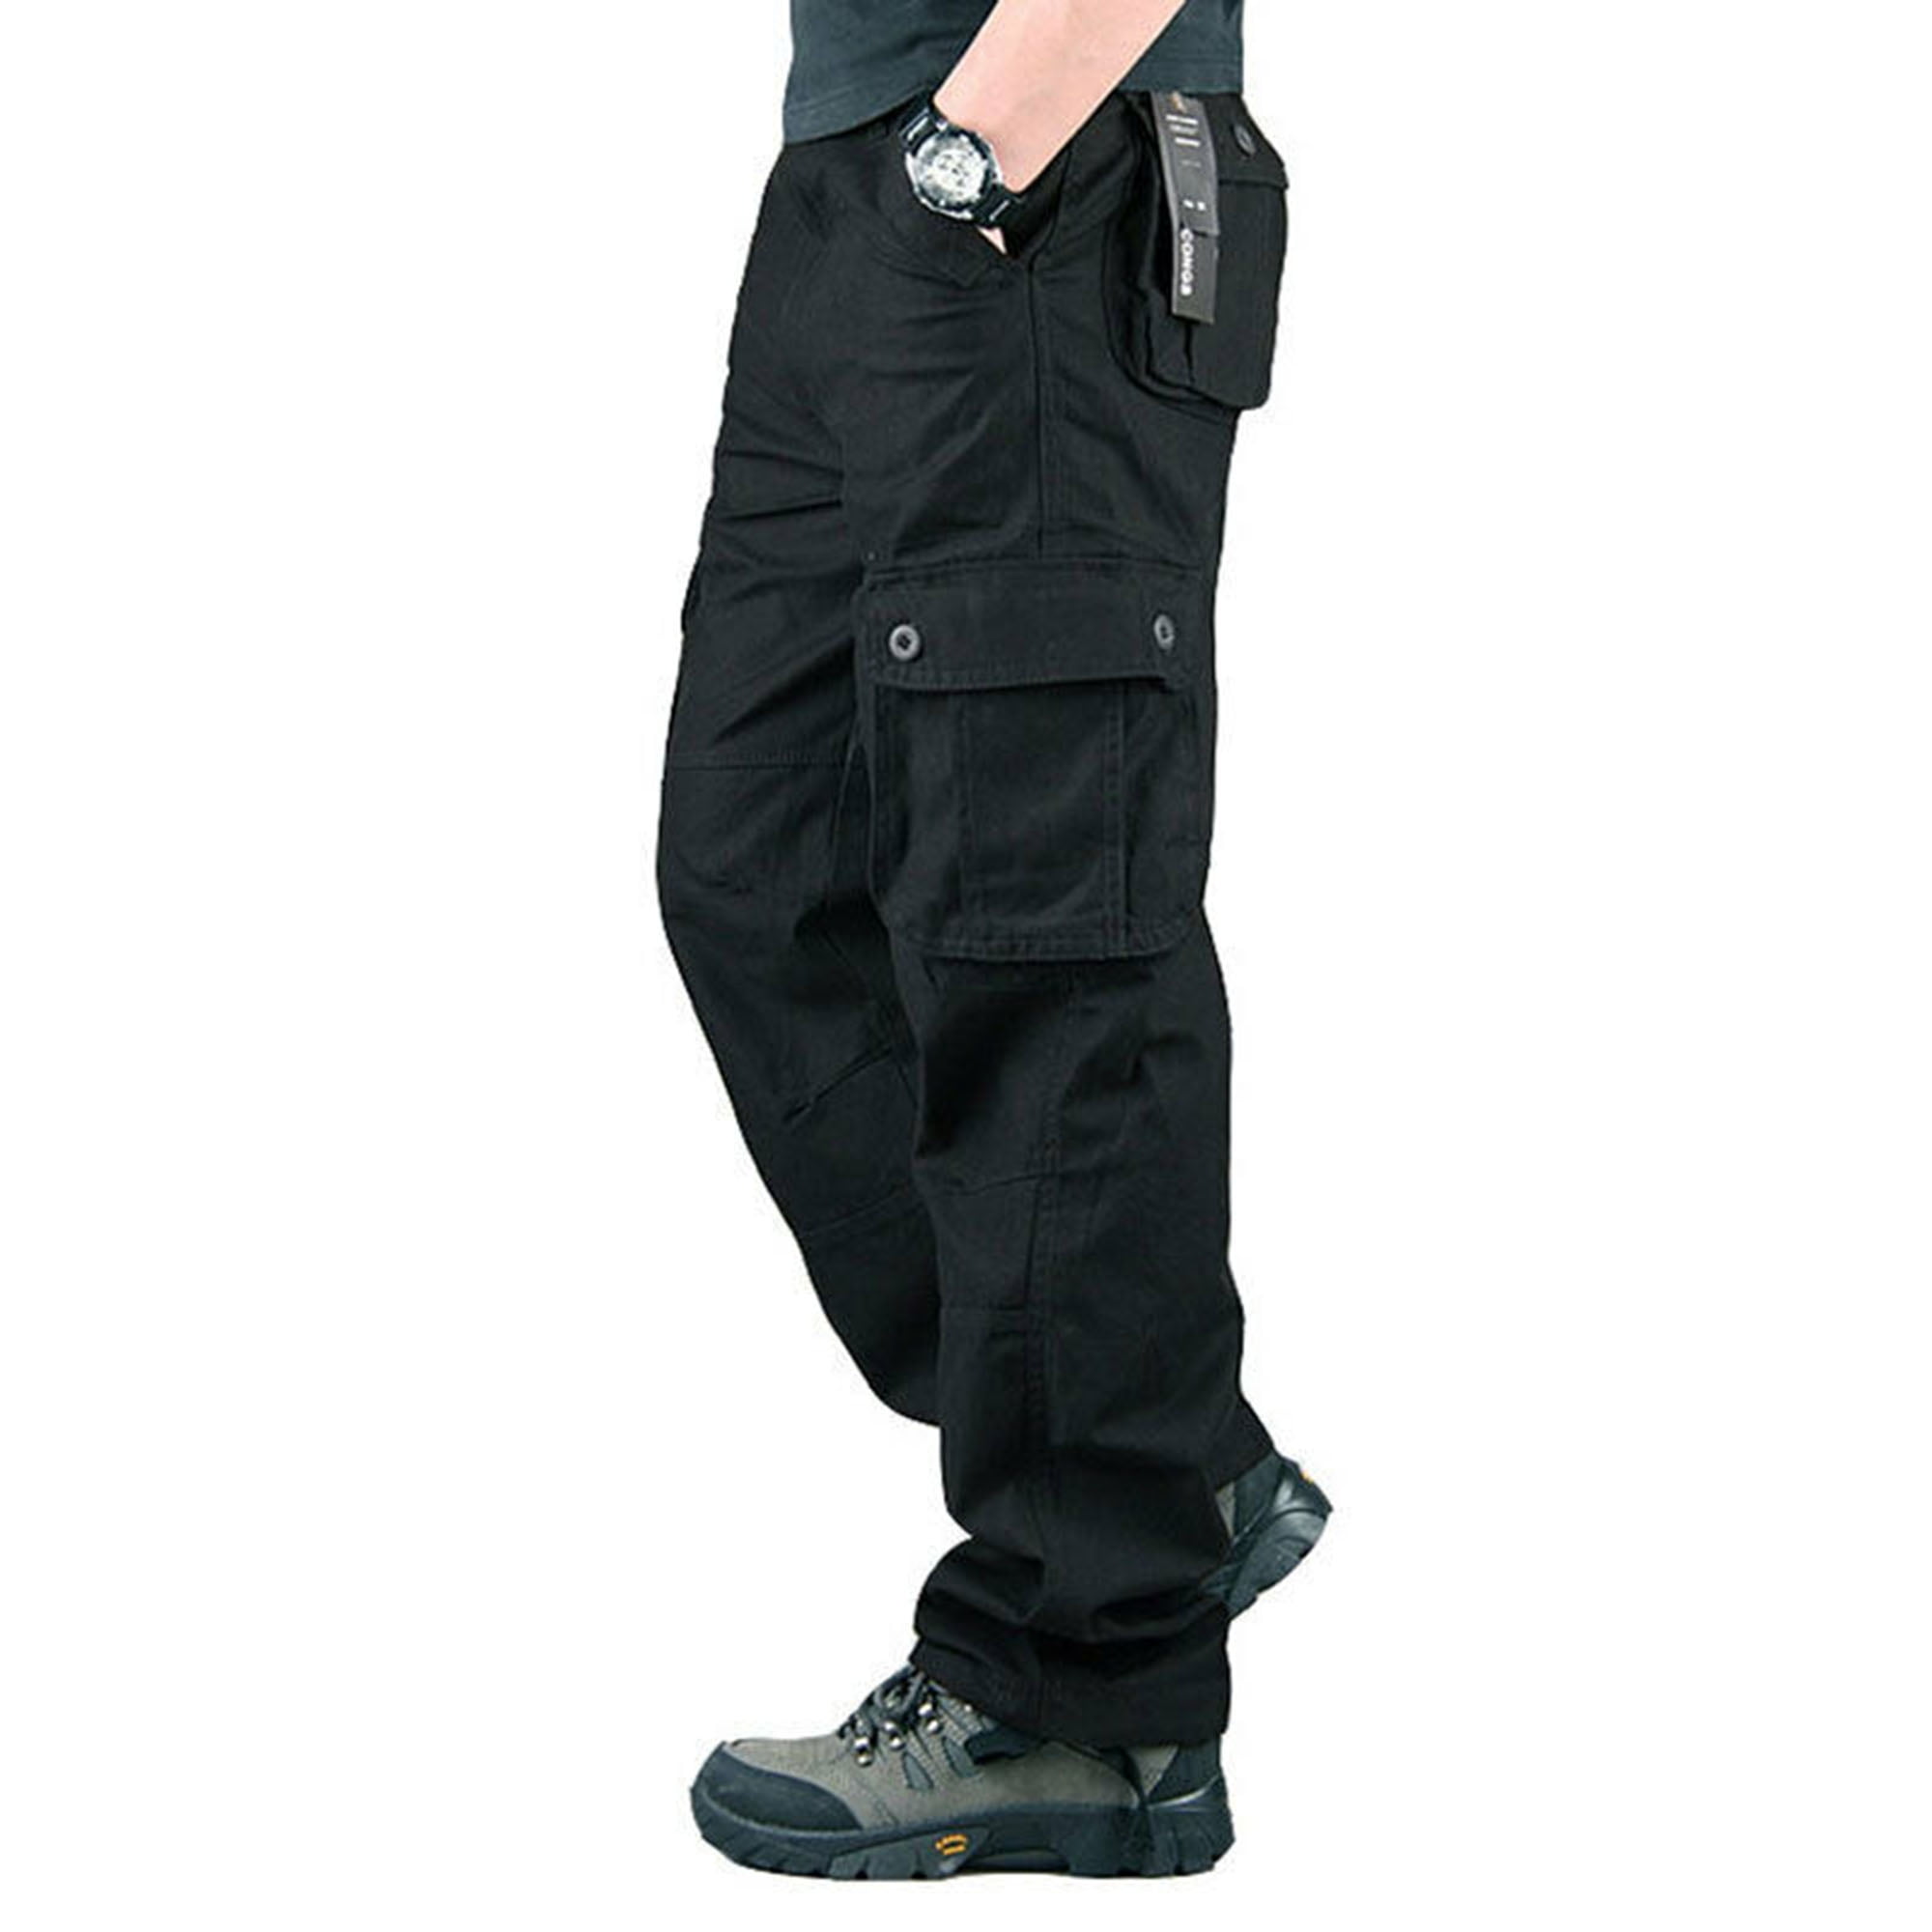 LELINTA Men's Cargo Pants with Pockets Casual Military Cargo Work Pants ...